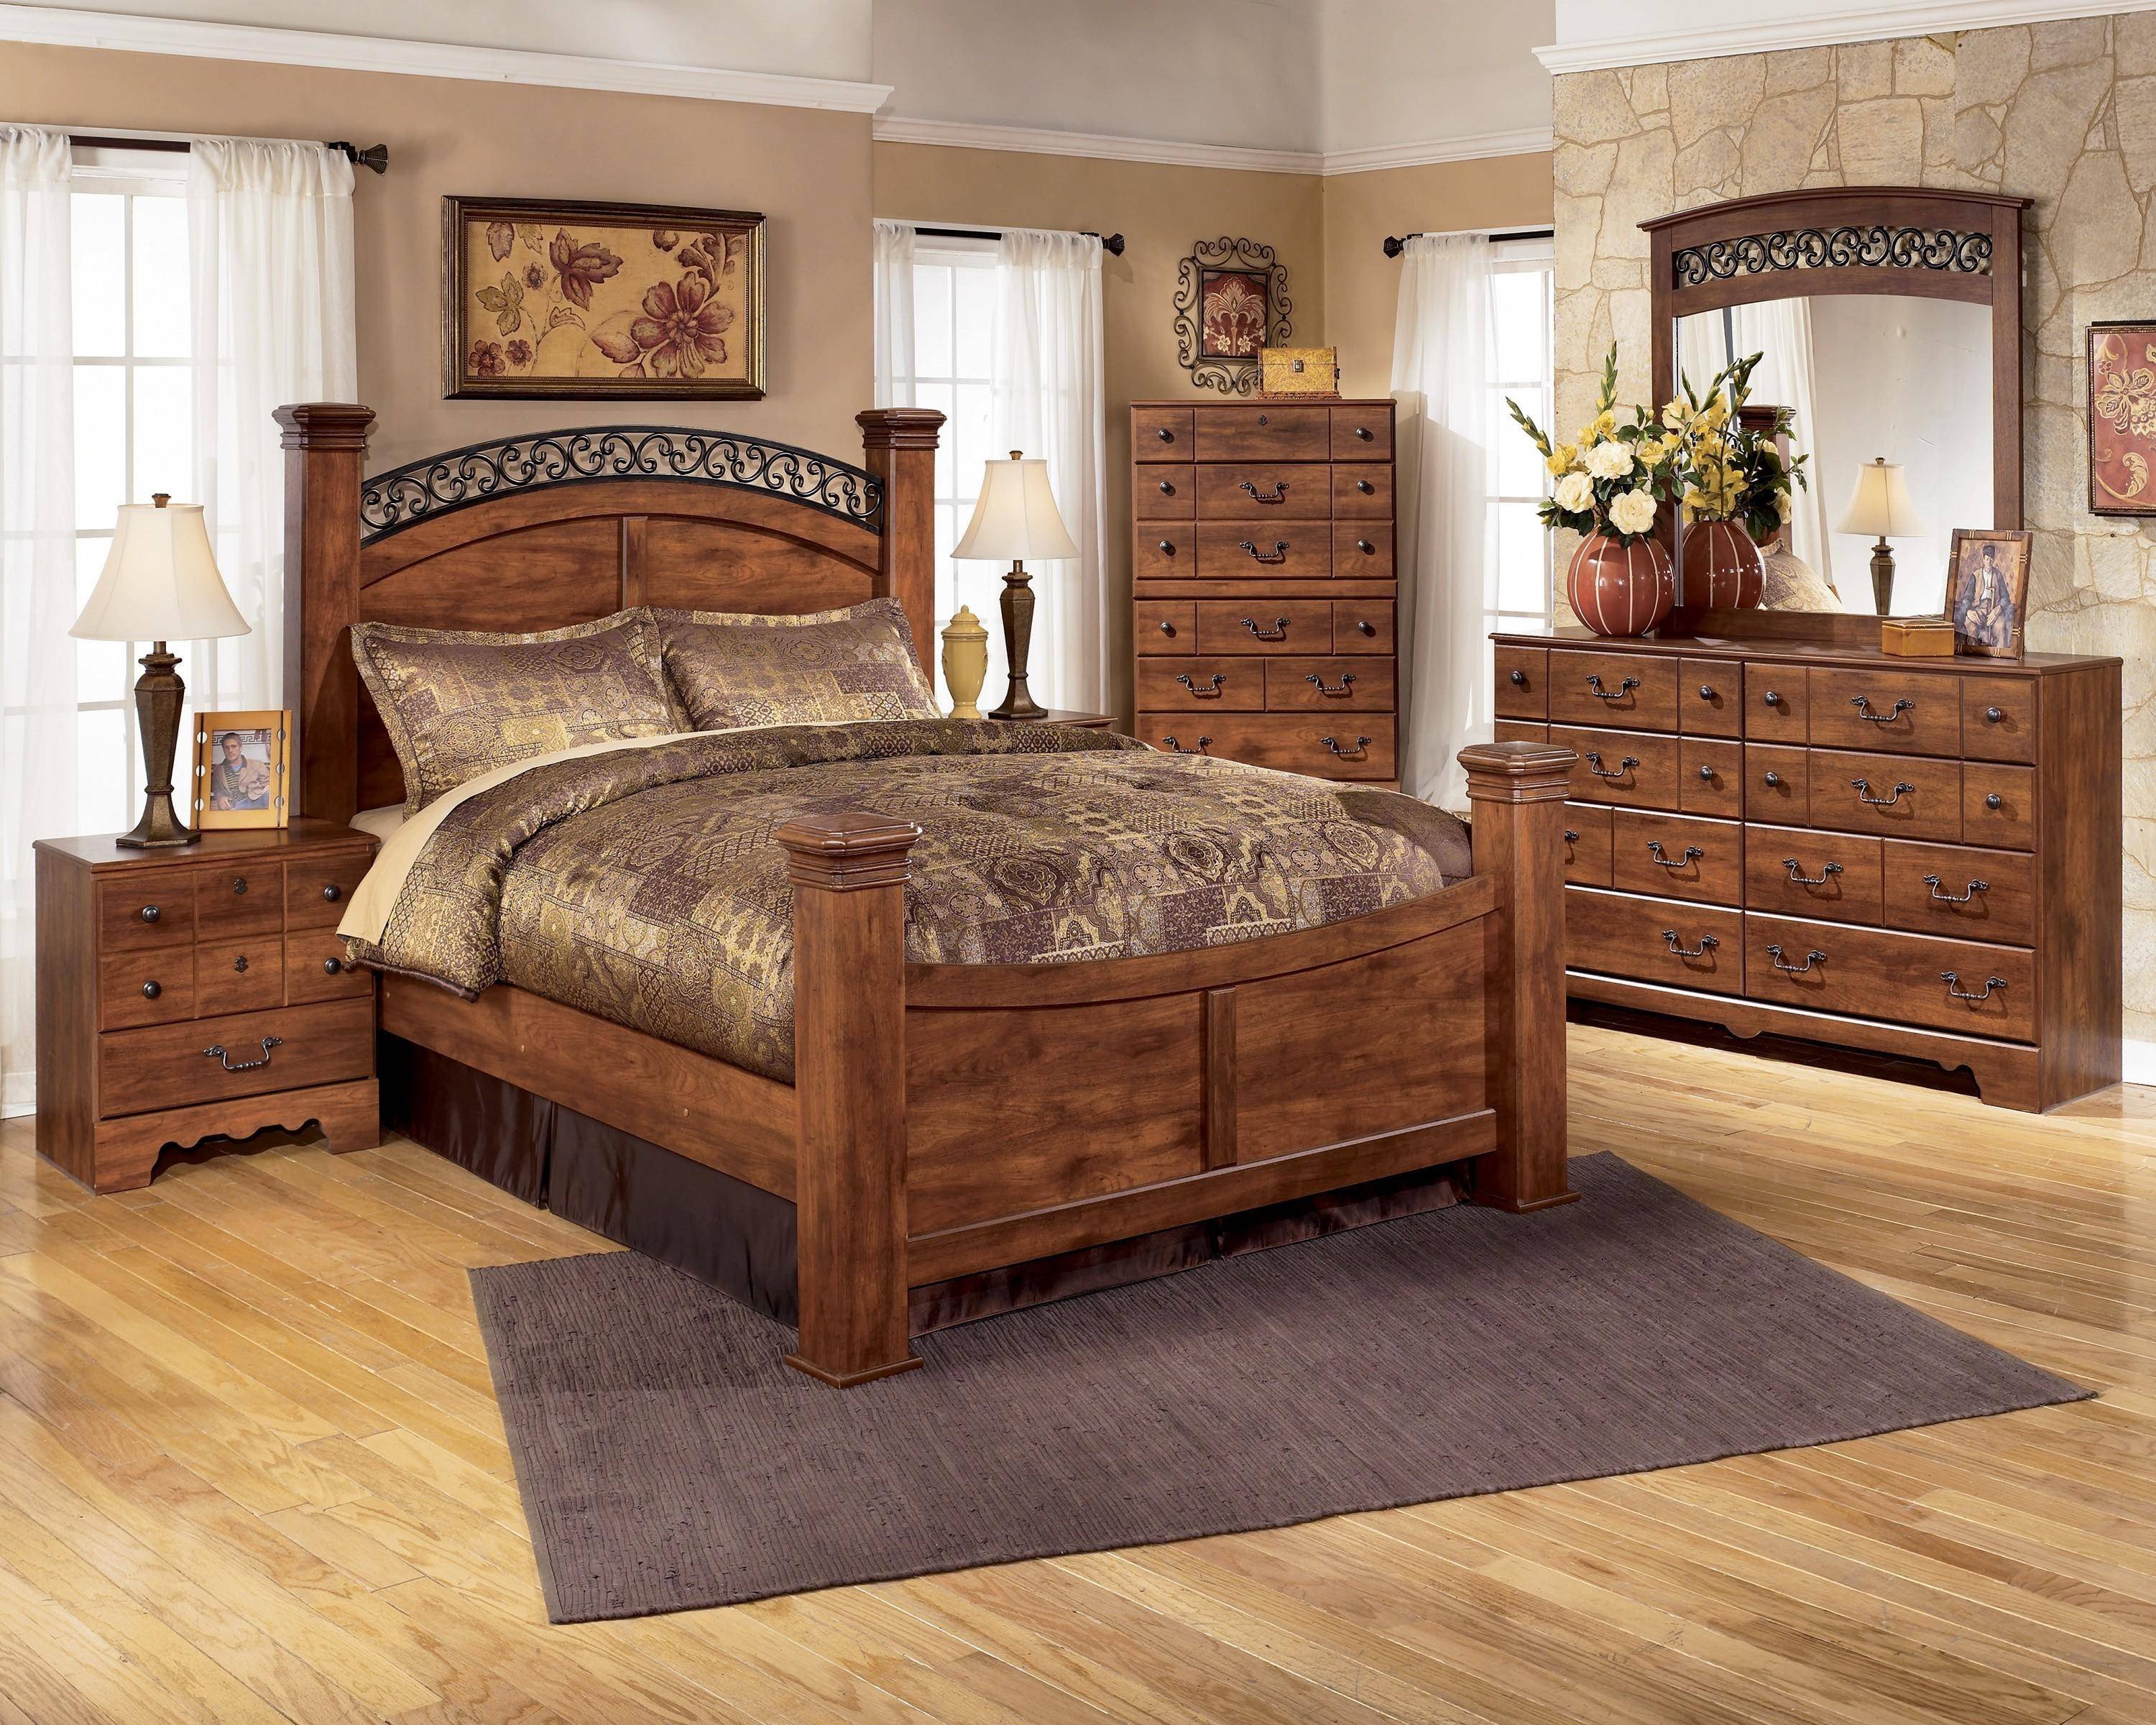 King Size Four Post Bedroom Decor